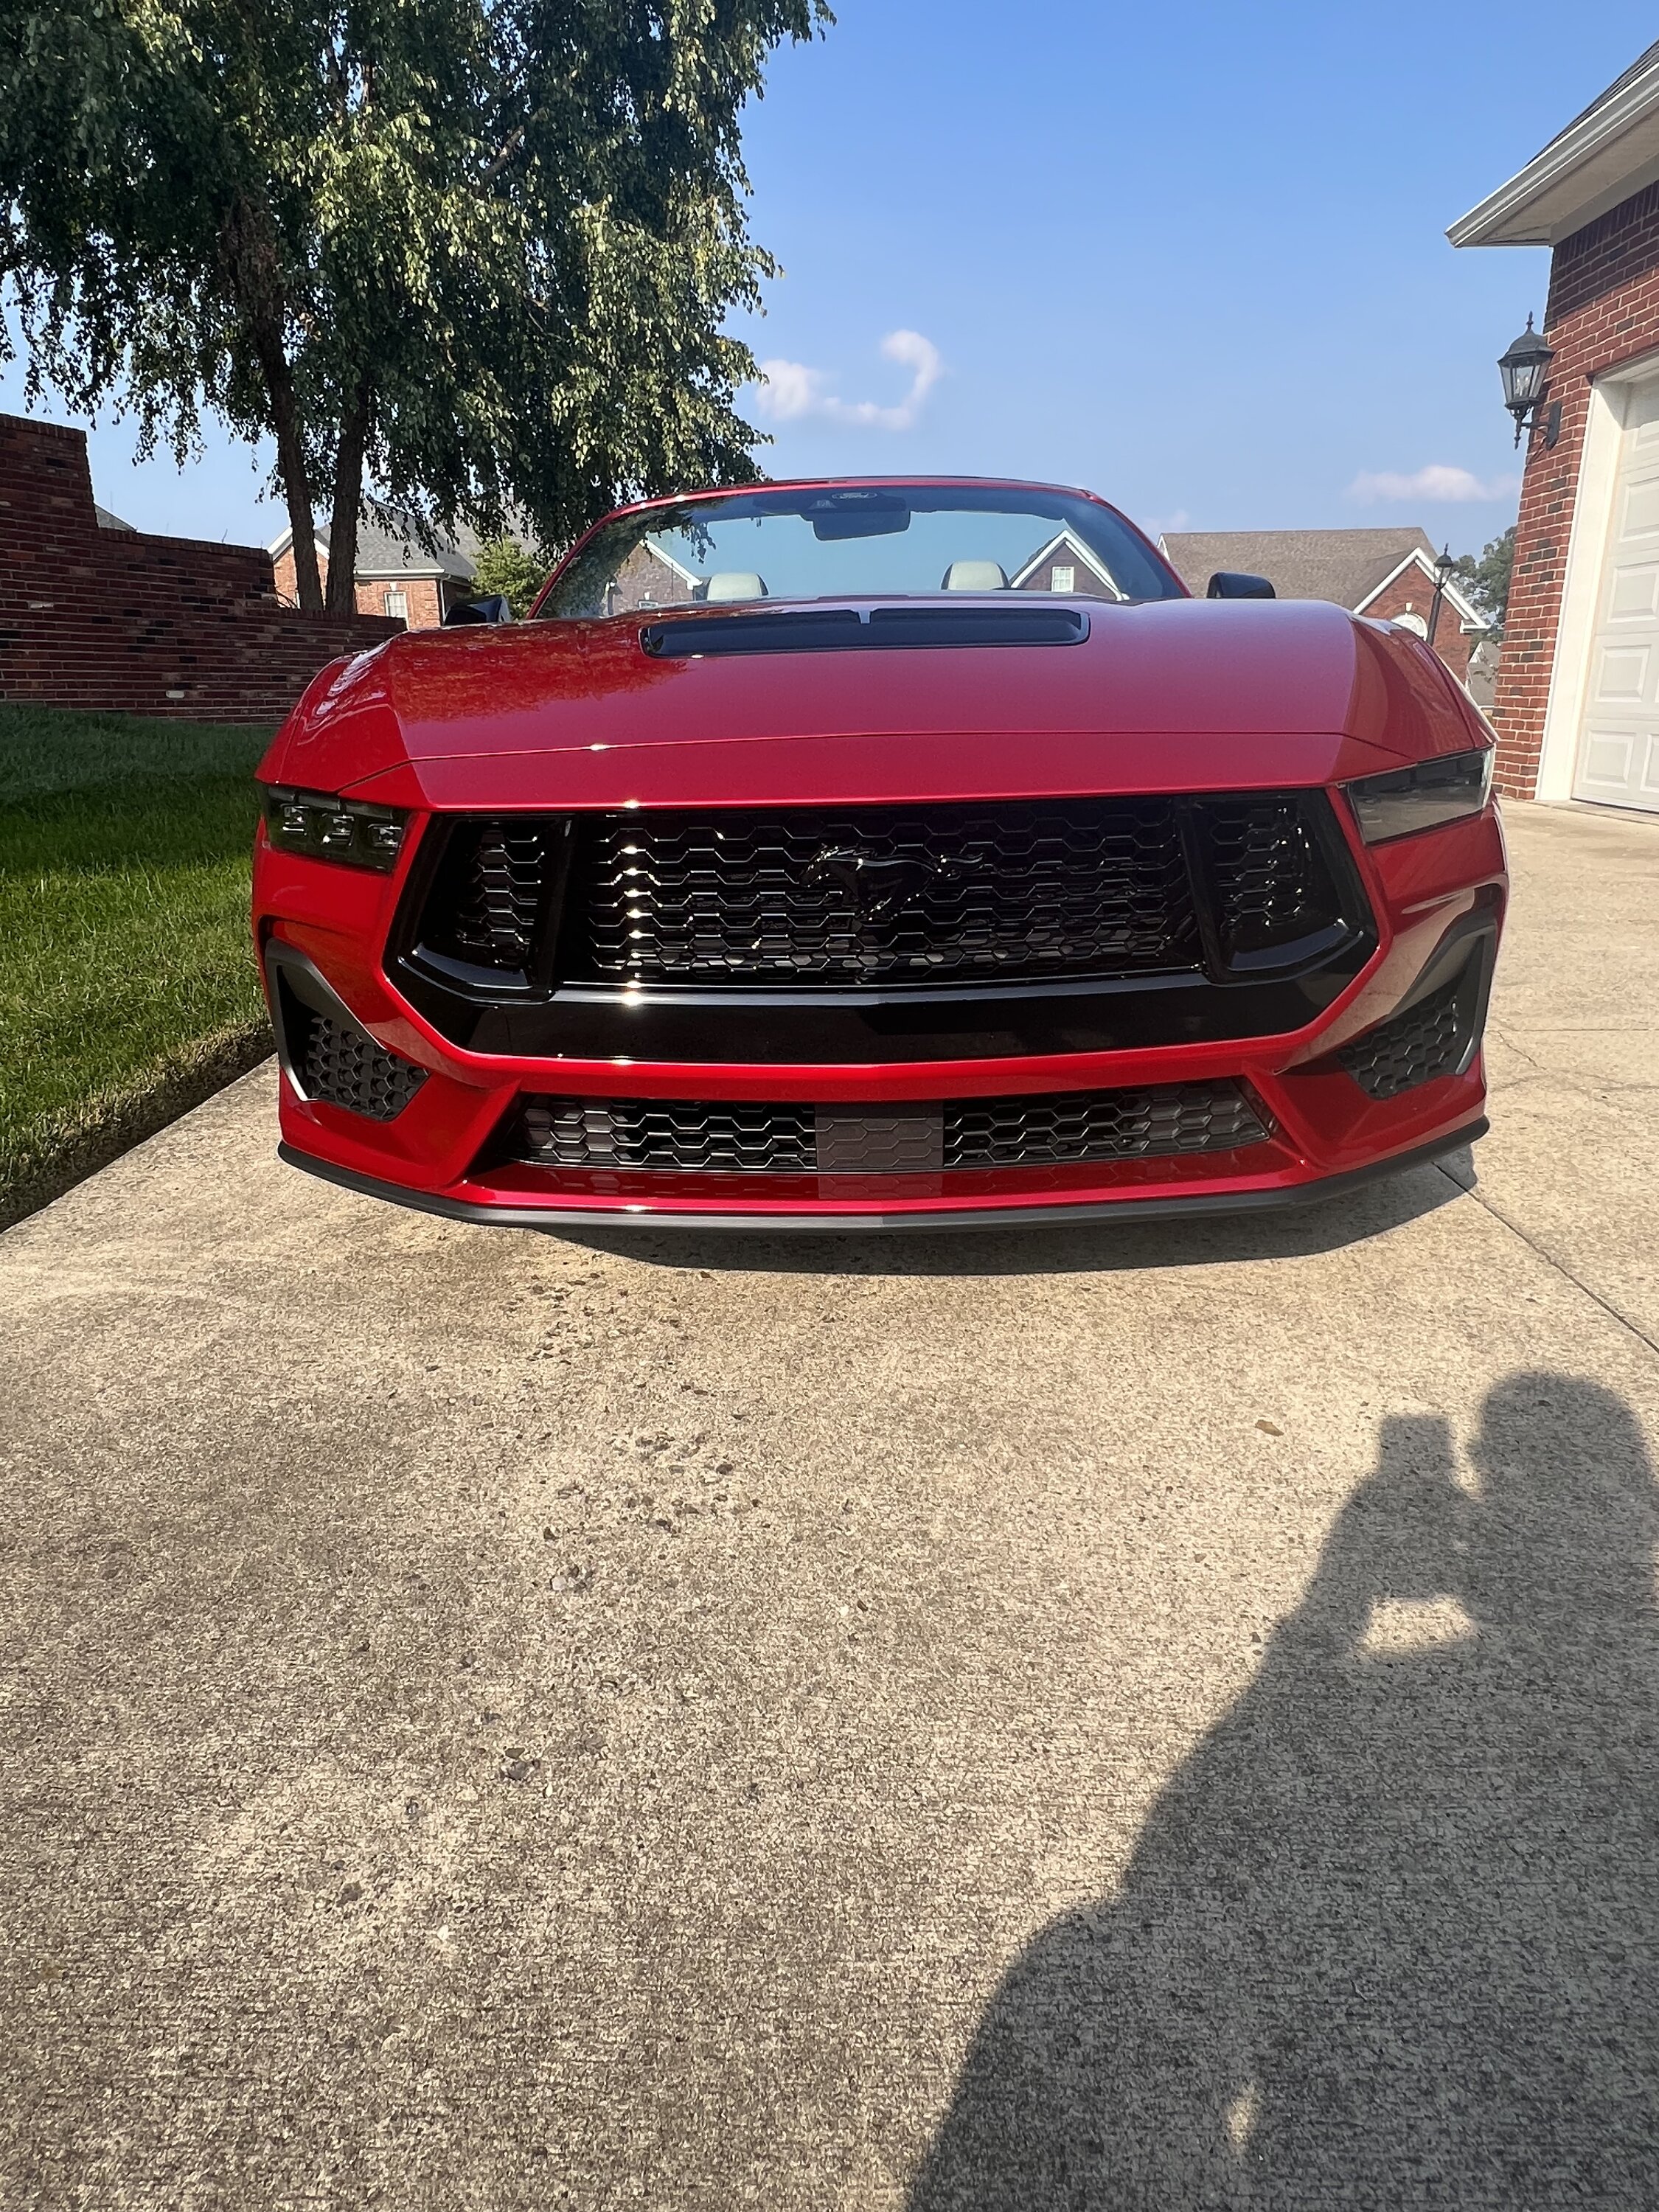 S650 Mustang Official RAPID RED Mustang S650 Thread IMG_6846